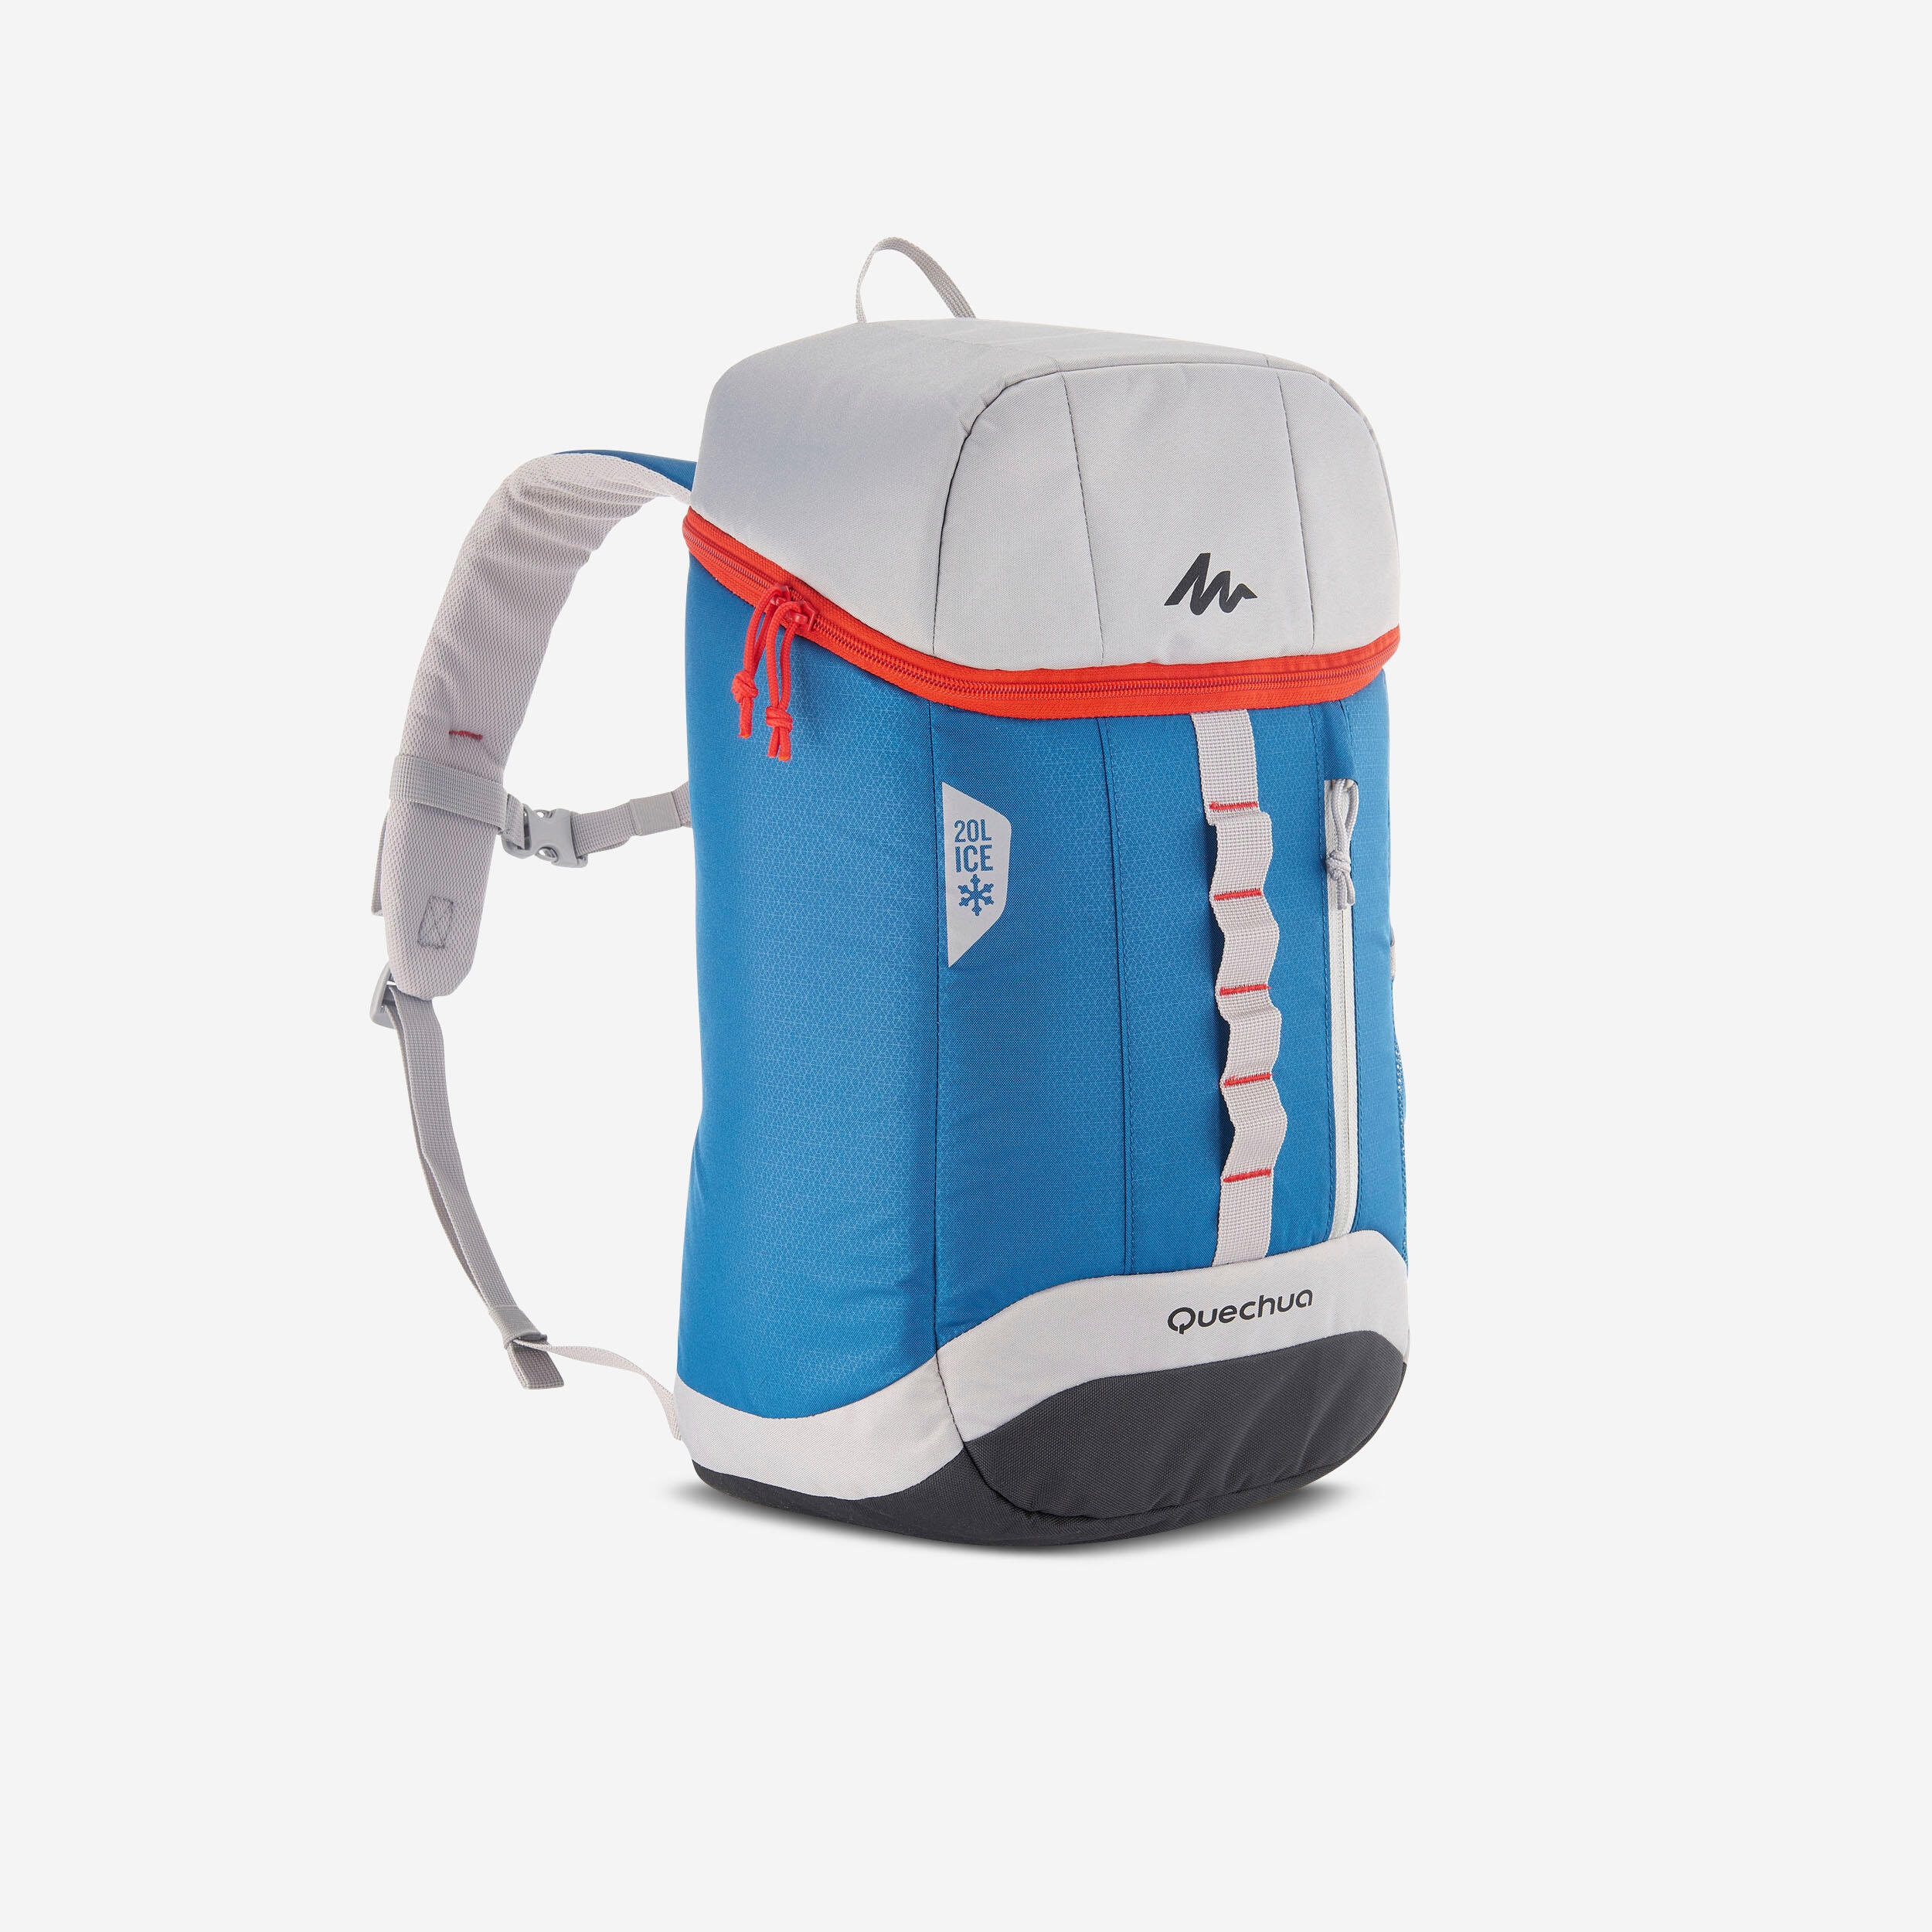 Ice Isothermal Walking Backpack - 20 litres 1/14